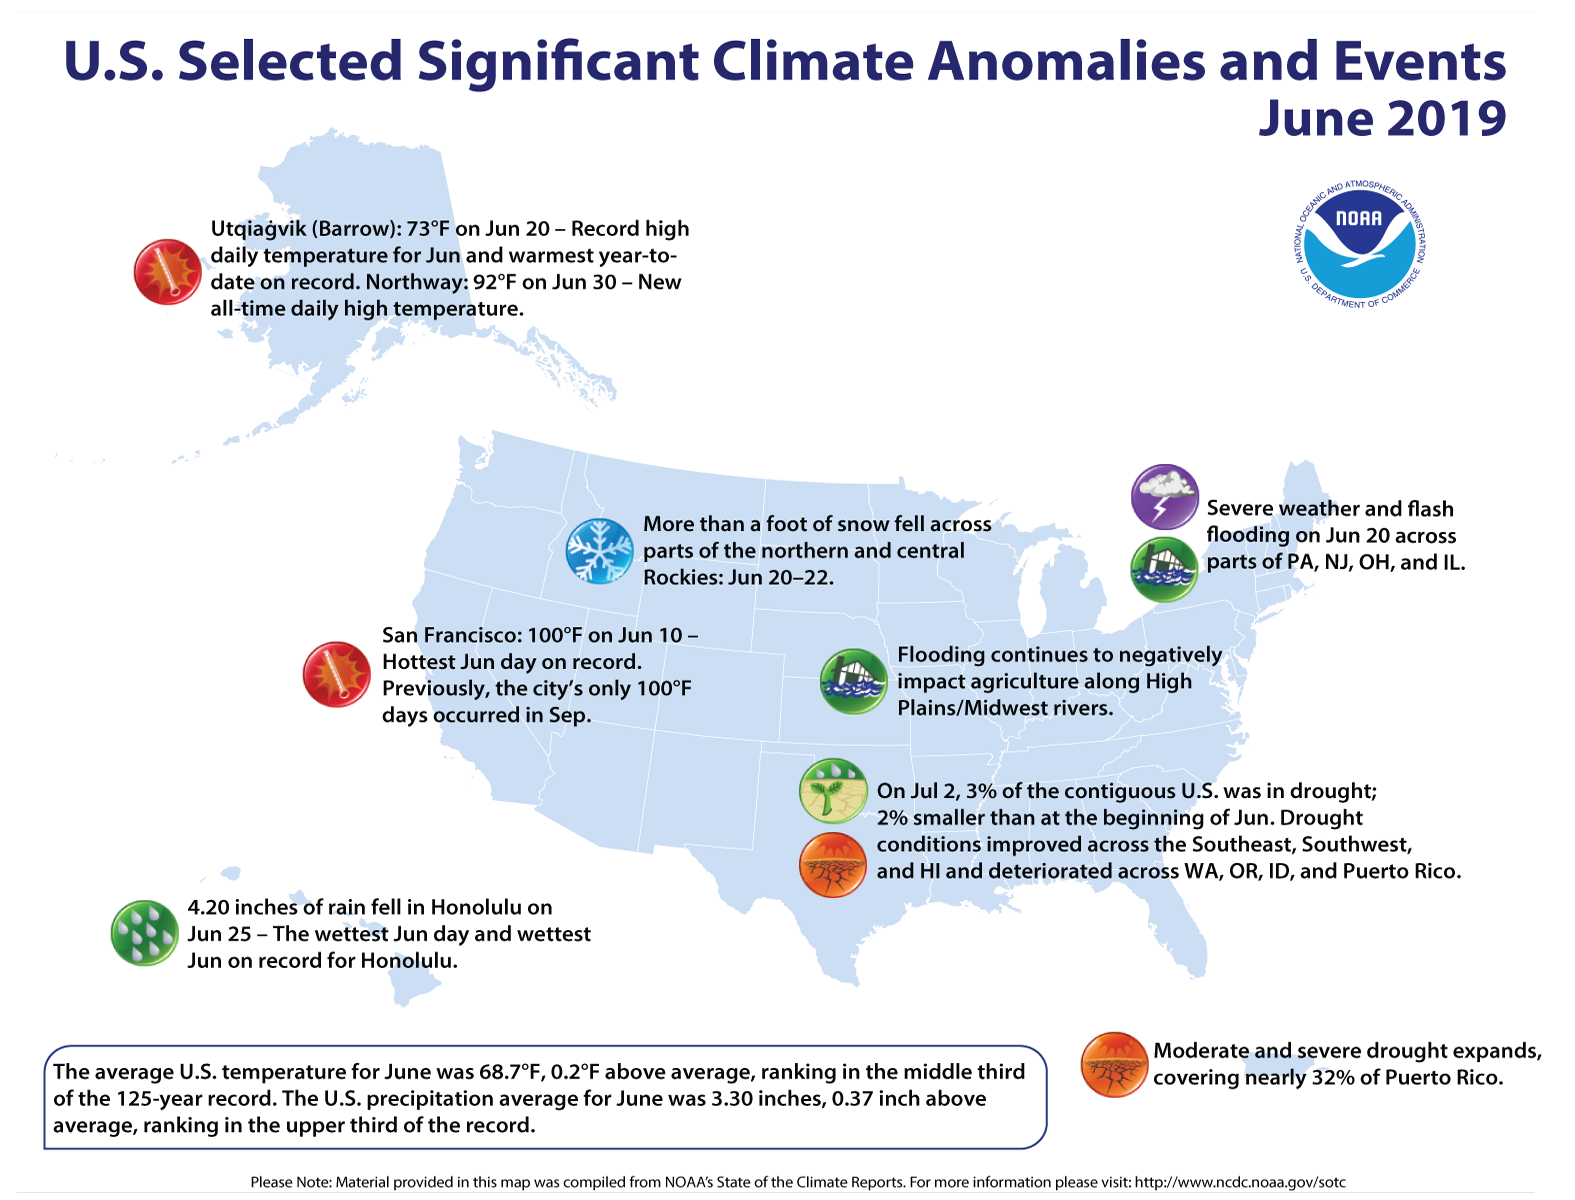 An annotated map of the United States showing notable climate events that occurred across the country during June 2019. For more, see the bulleted list below and the report summary online at http://bit.ly/USClimate201906.